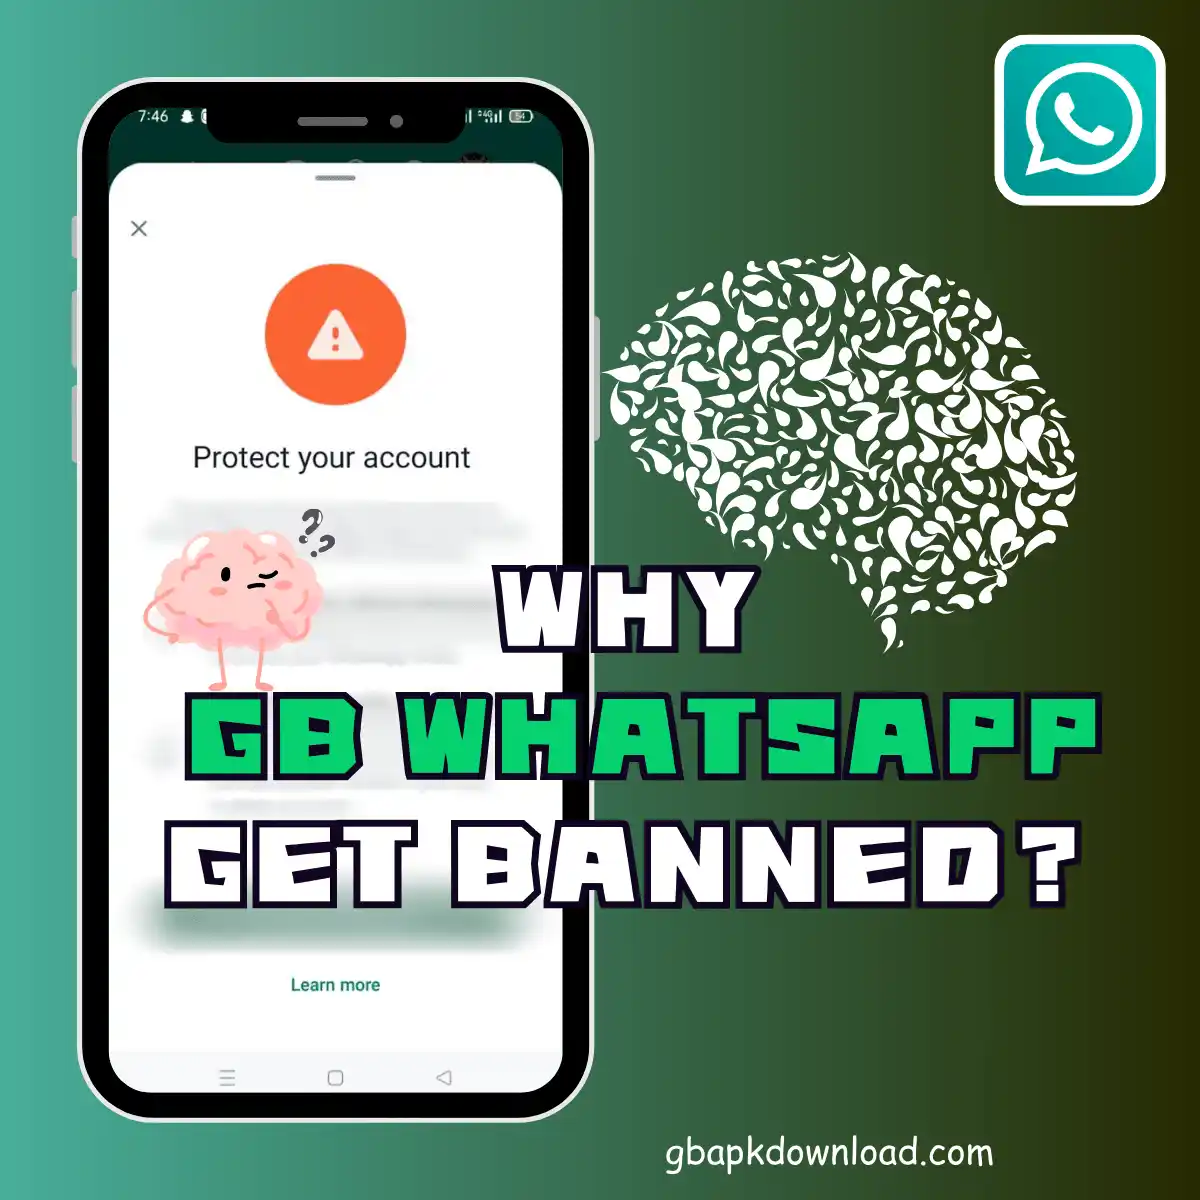 Why GB WhatsApp get banned?